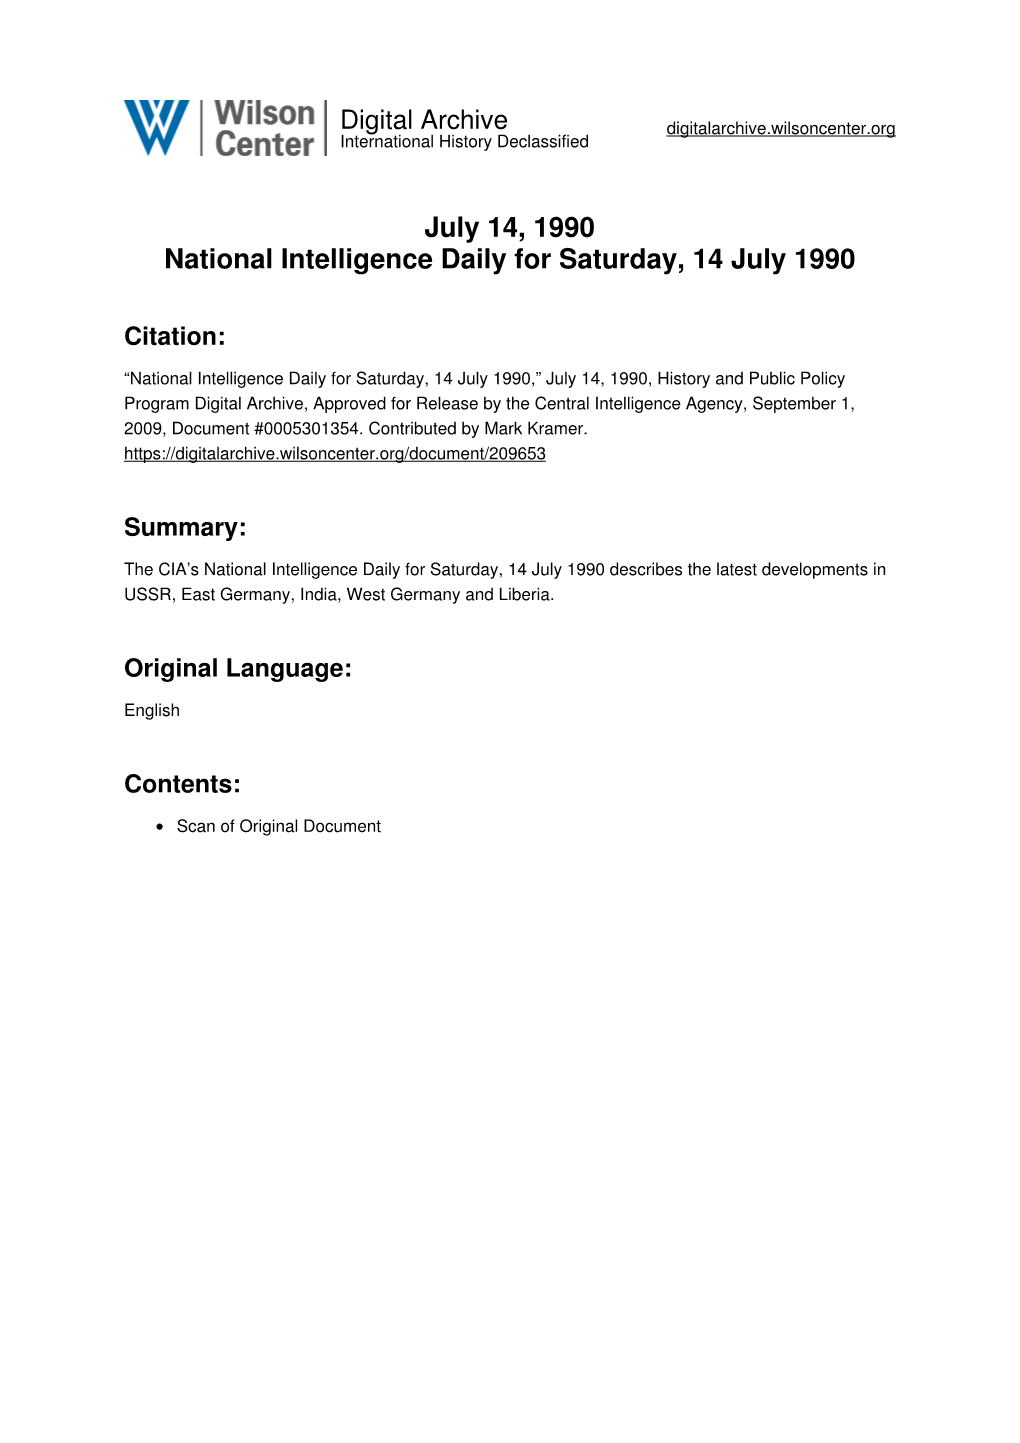 July 14, 1990 National Intelligence Daily for Saturday, 14 July 1990